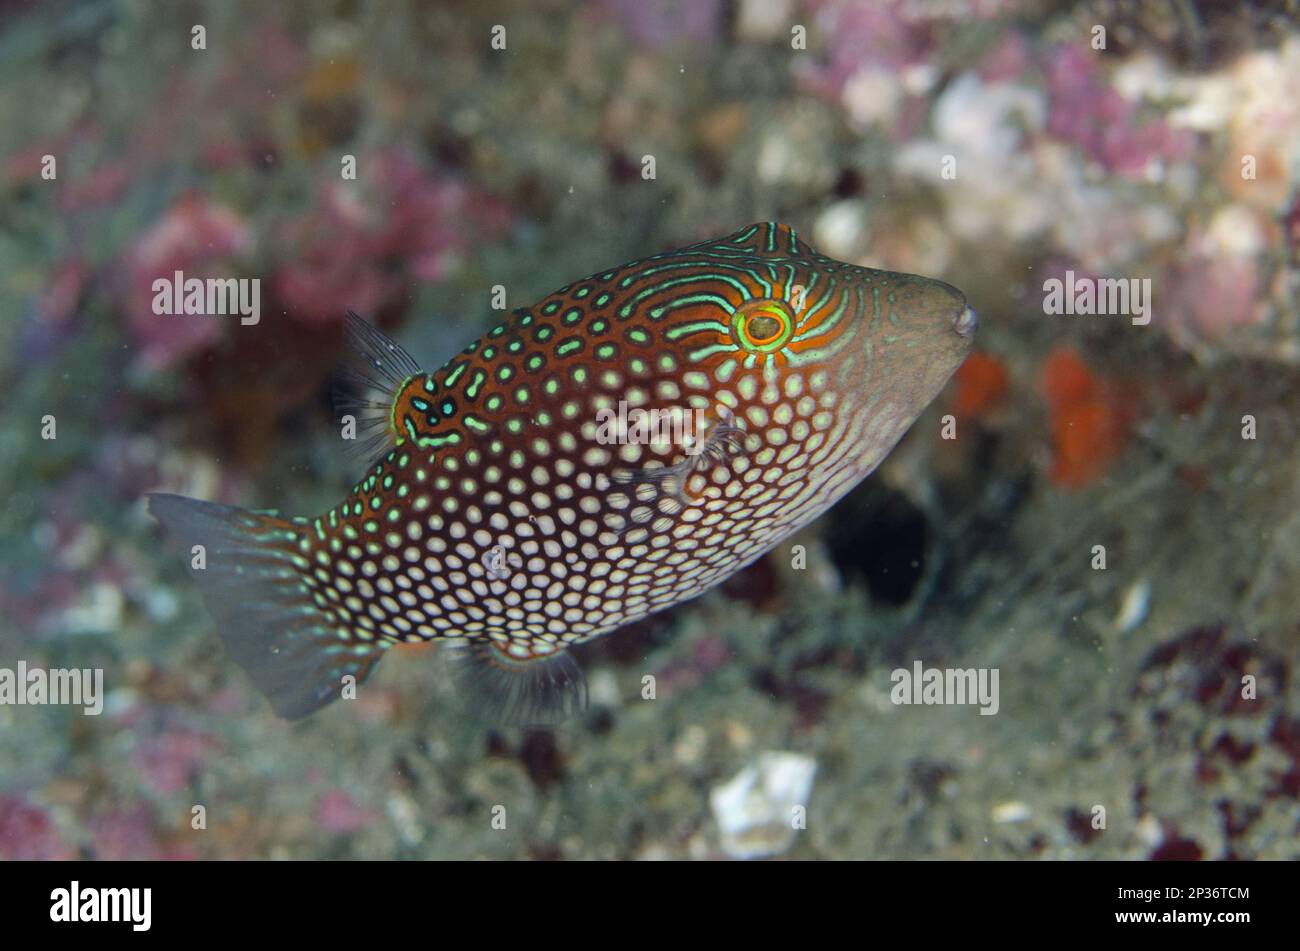 Net-spotted pufferfish, Net-spotted pufferfish, Other animals, Fish, Animals, Pufferfish, Green-spotted Toby (Canthigaster janthinoptera) adult Stock Photo